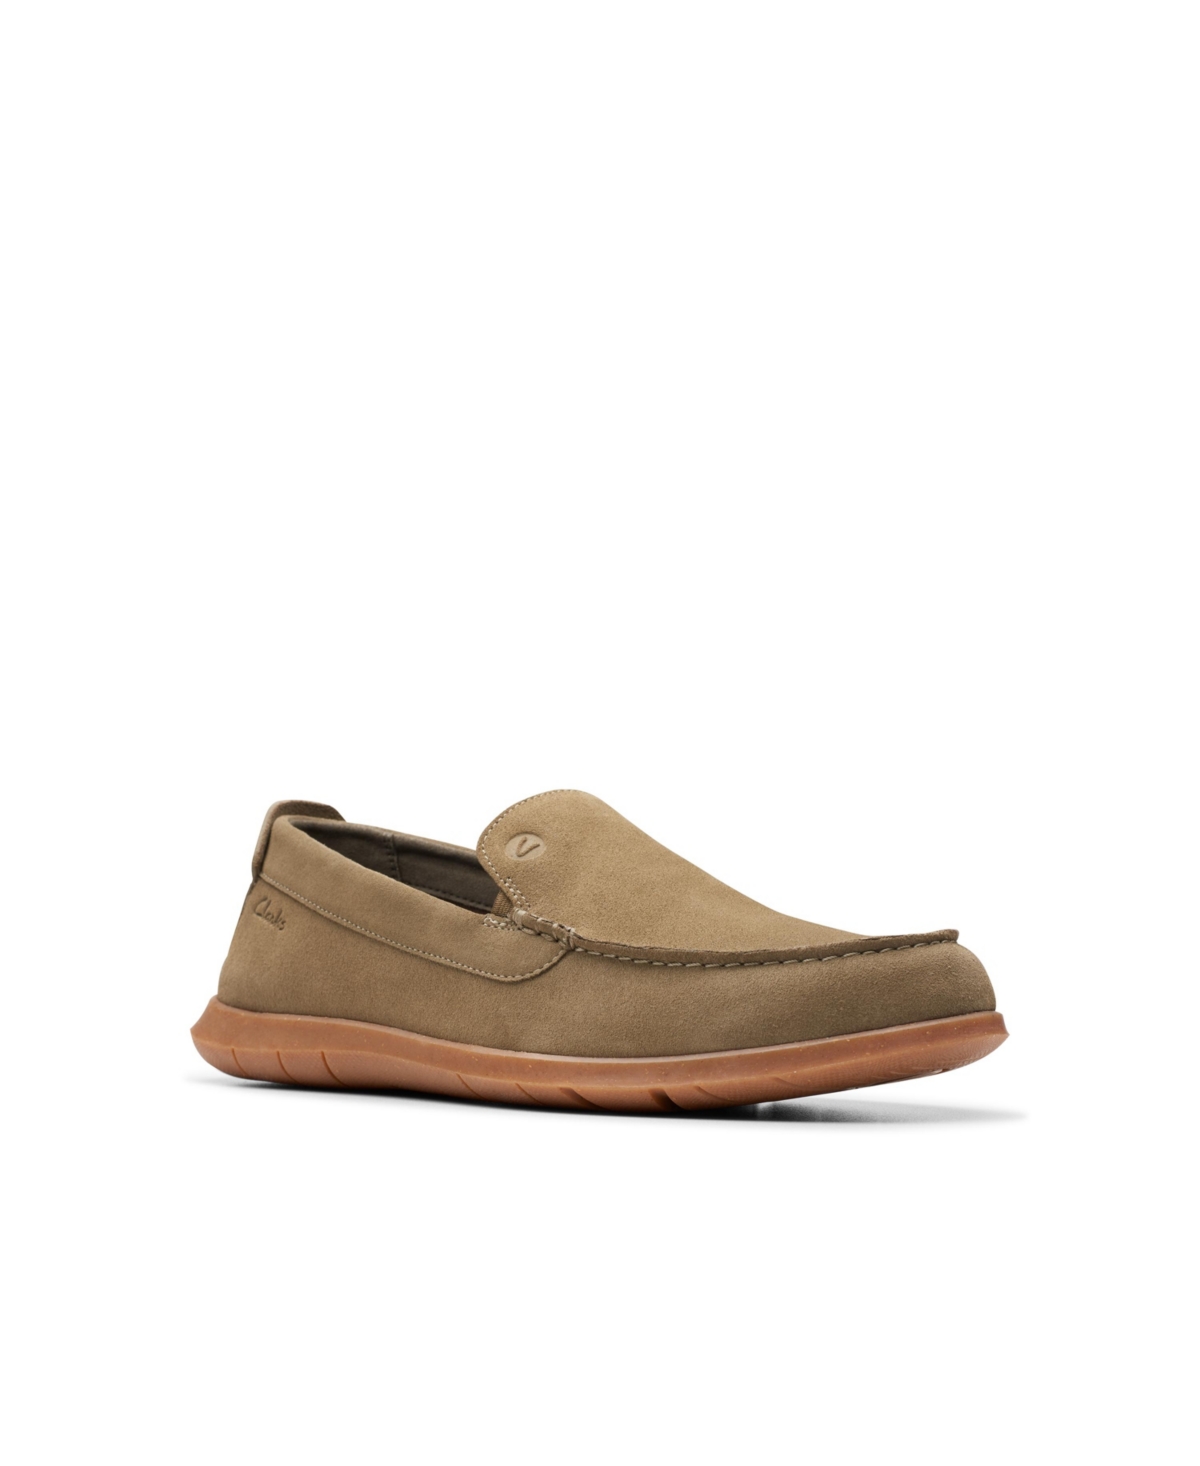 Men's Collection Flexway Step Slip On Shoes - Sand Suede